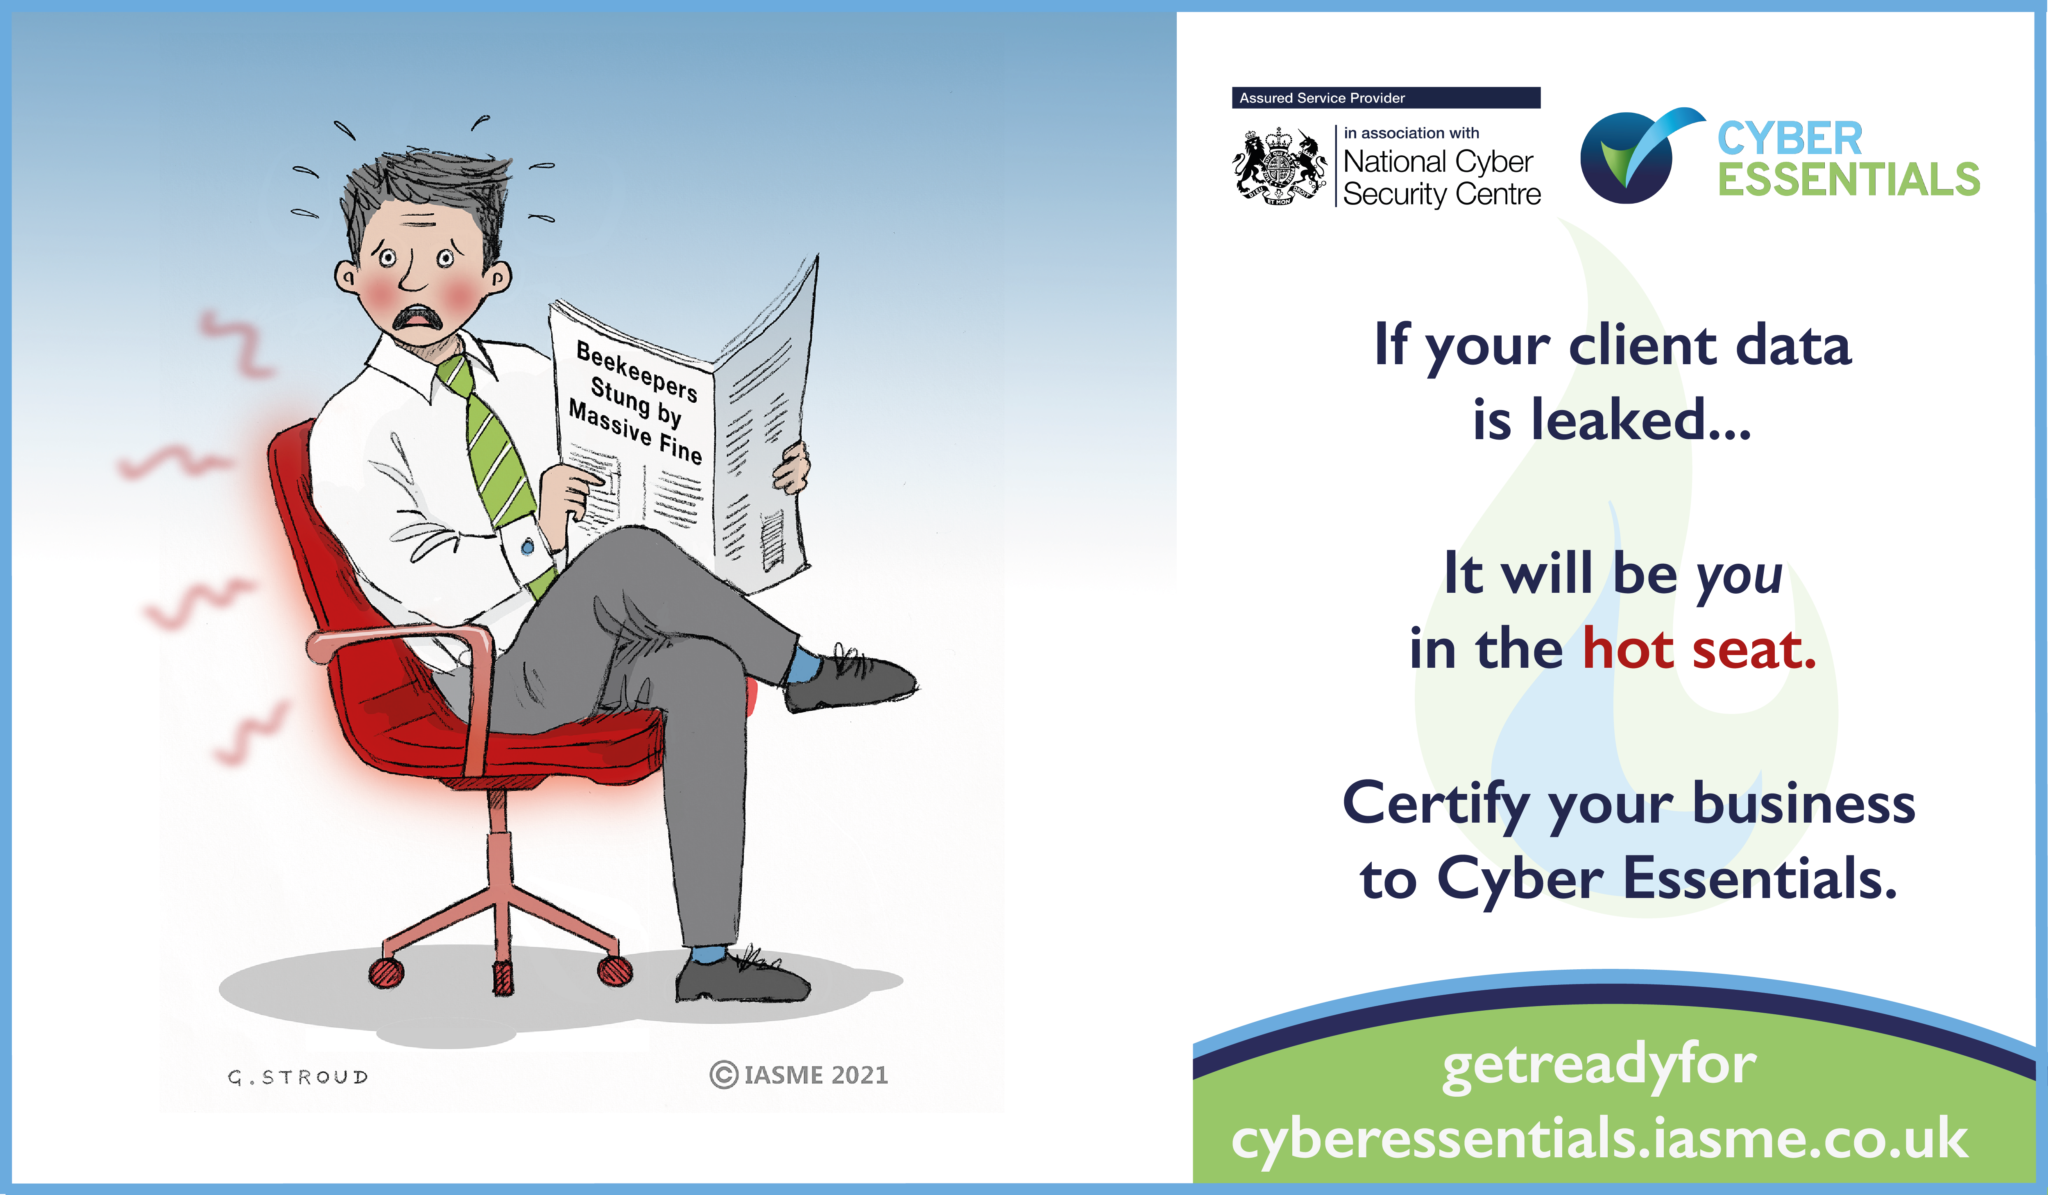 Cyber Essentials – simple, effective and affordable cyber security for the legal profession.